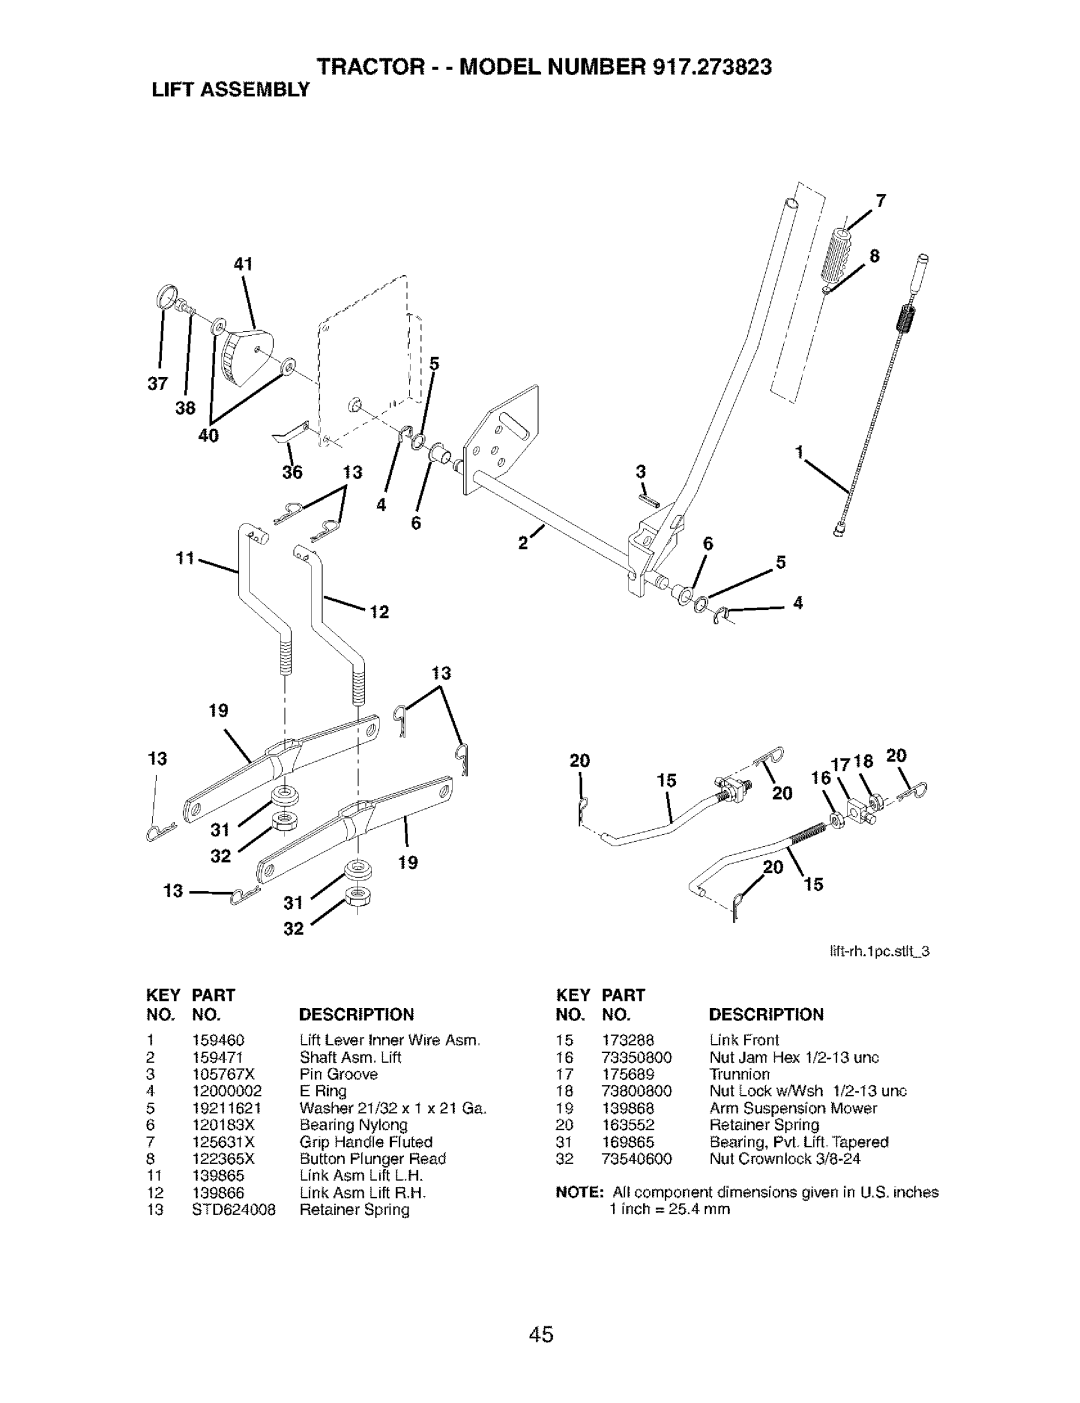 Craftsman 917.273823 owner manual Tractor - - Model Number Lift Assembly, 3 6 4, 2O2O 